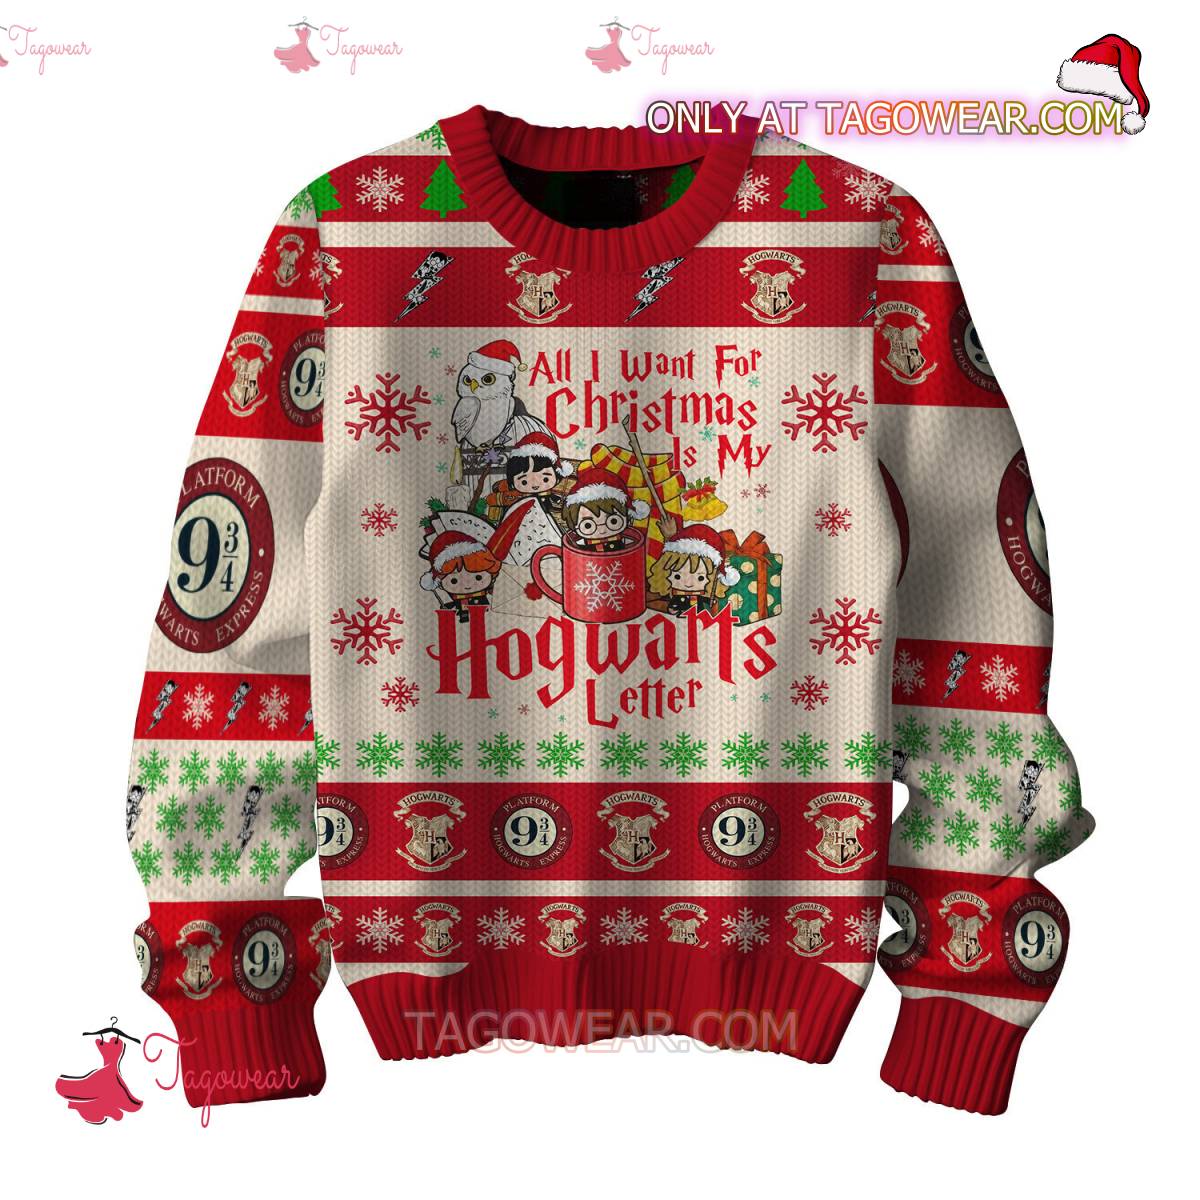 All I Want For Christmas Is Hogwarts Letter Ugly Christmas Sweater a